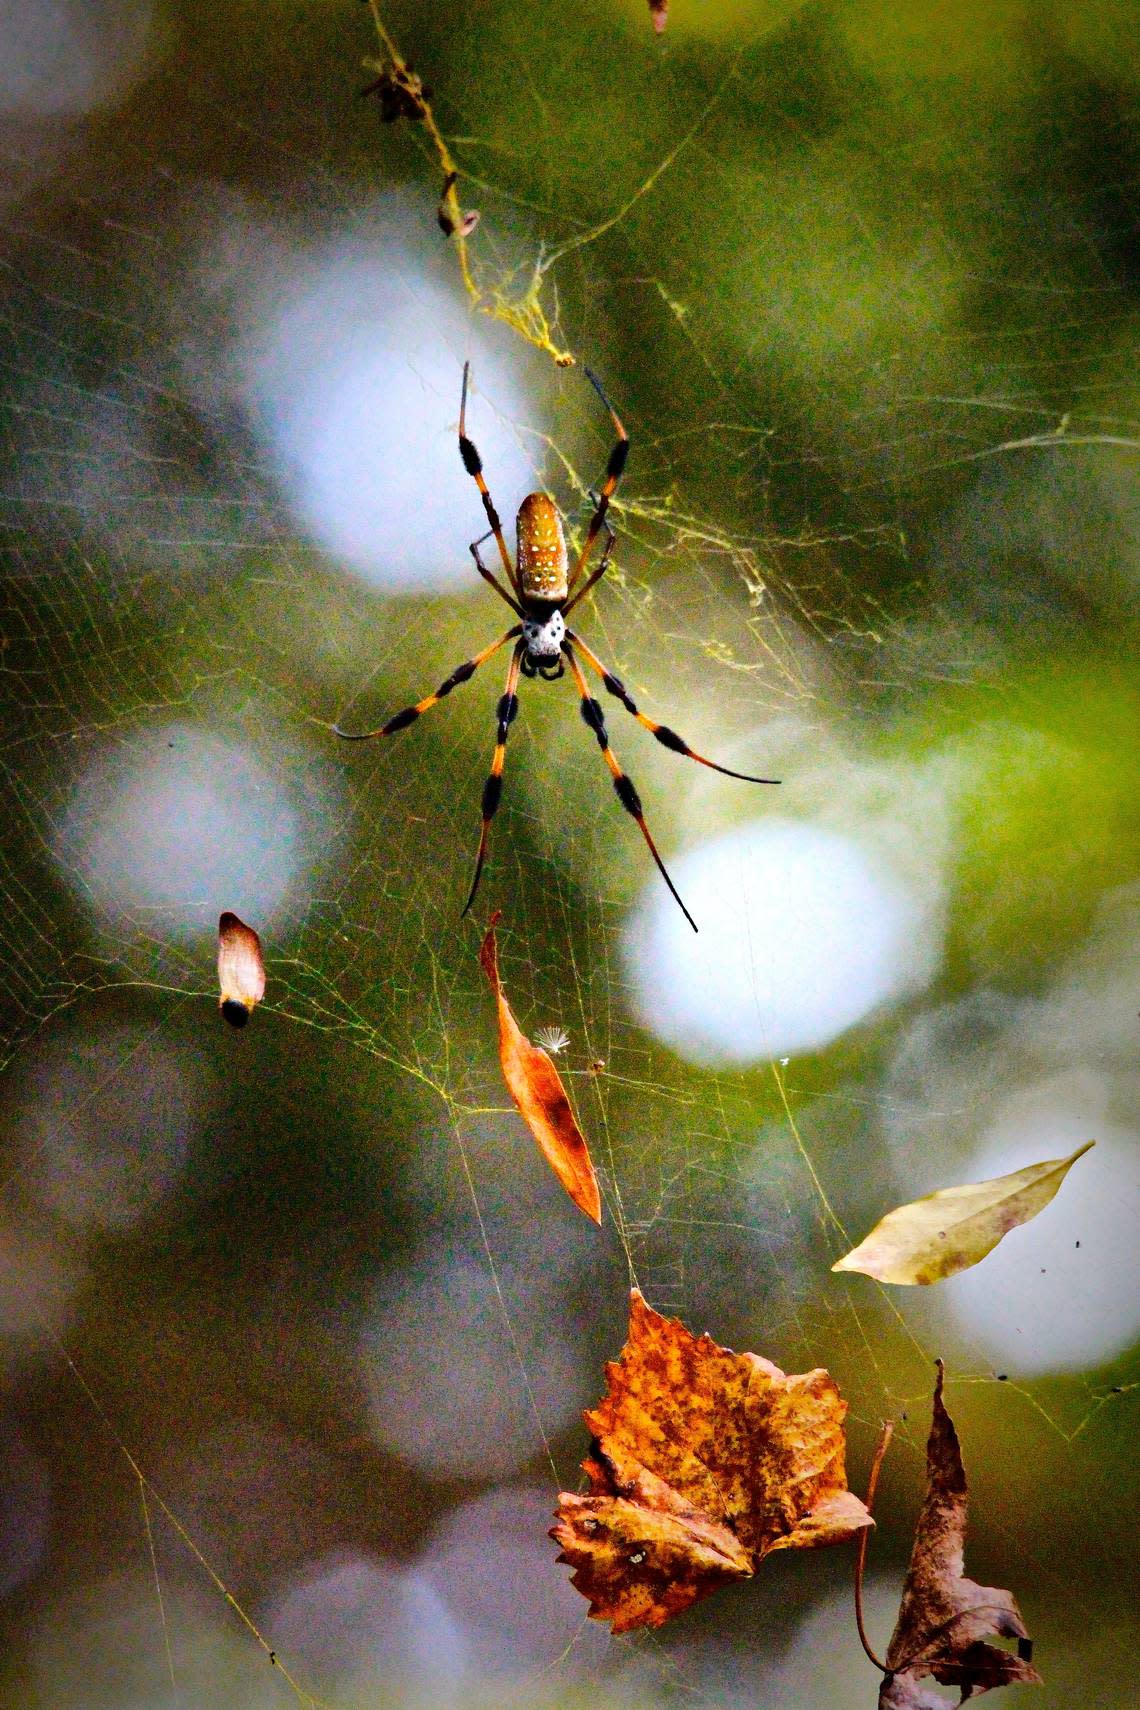 Golden silk orb-weavers, also known as banana spiders, spin thick, durable webs. This one caught and held several leaves.